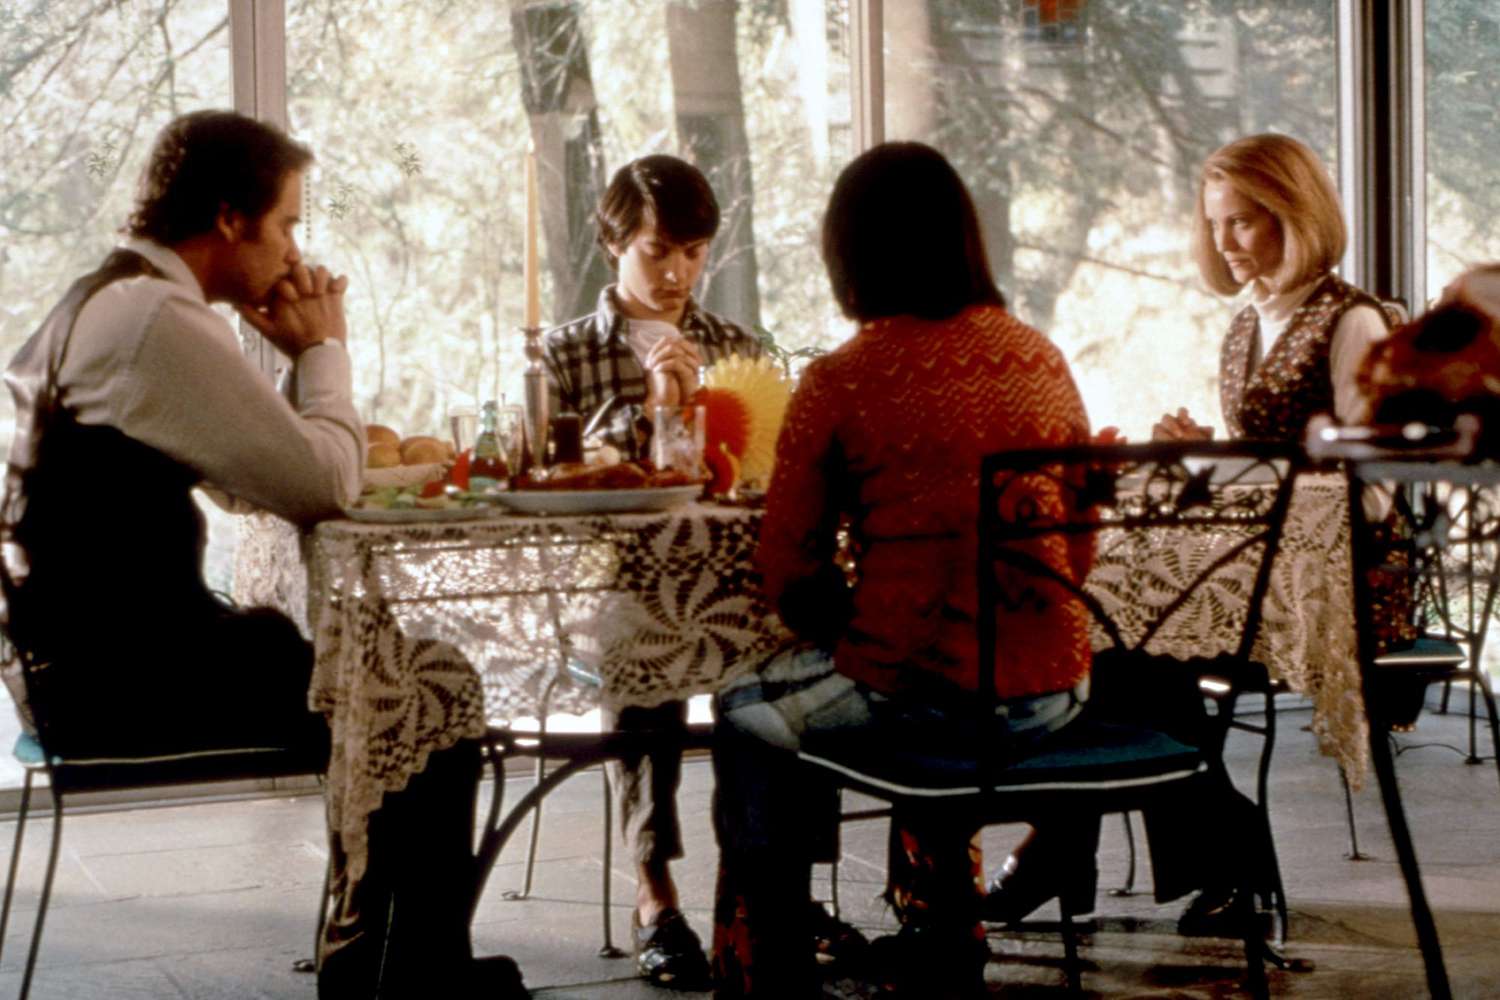 Kevin Kline, Tobey Maguire, Christina Ricci, and Joan Allen in 'The Ice Storm'